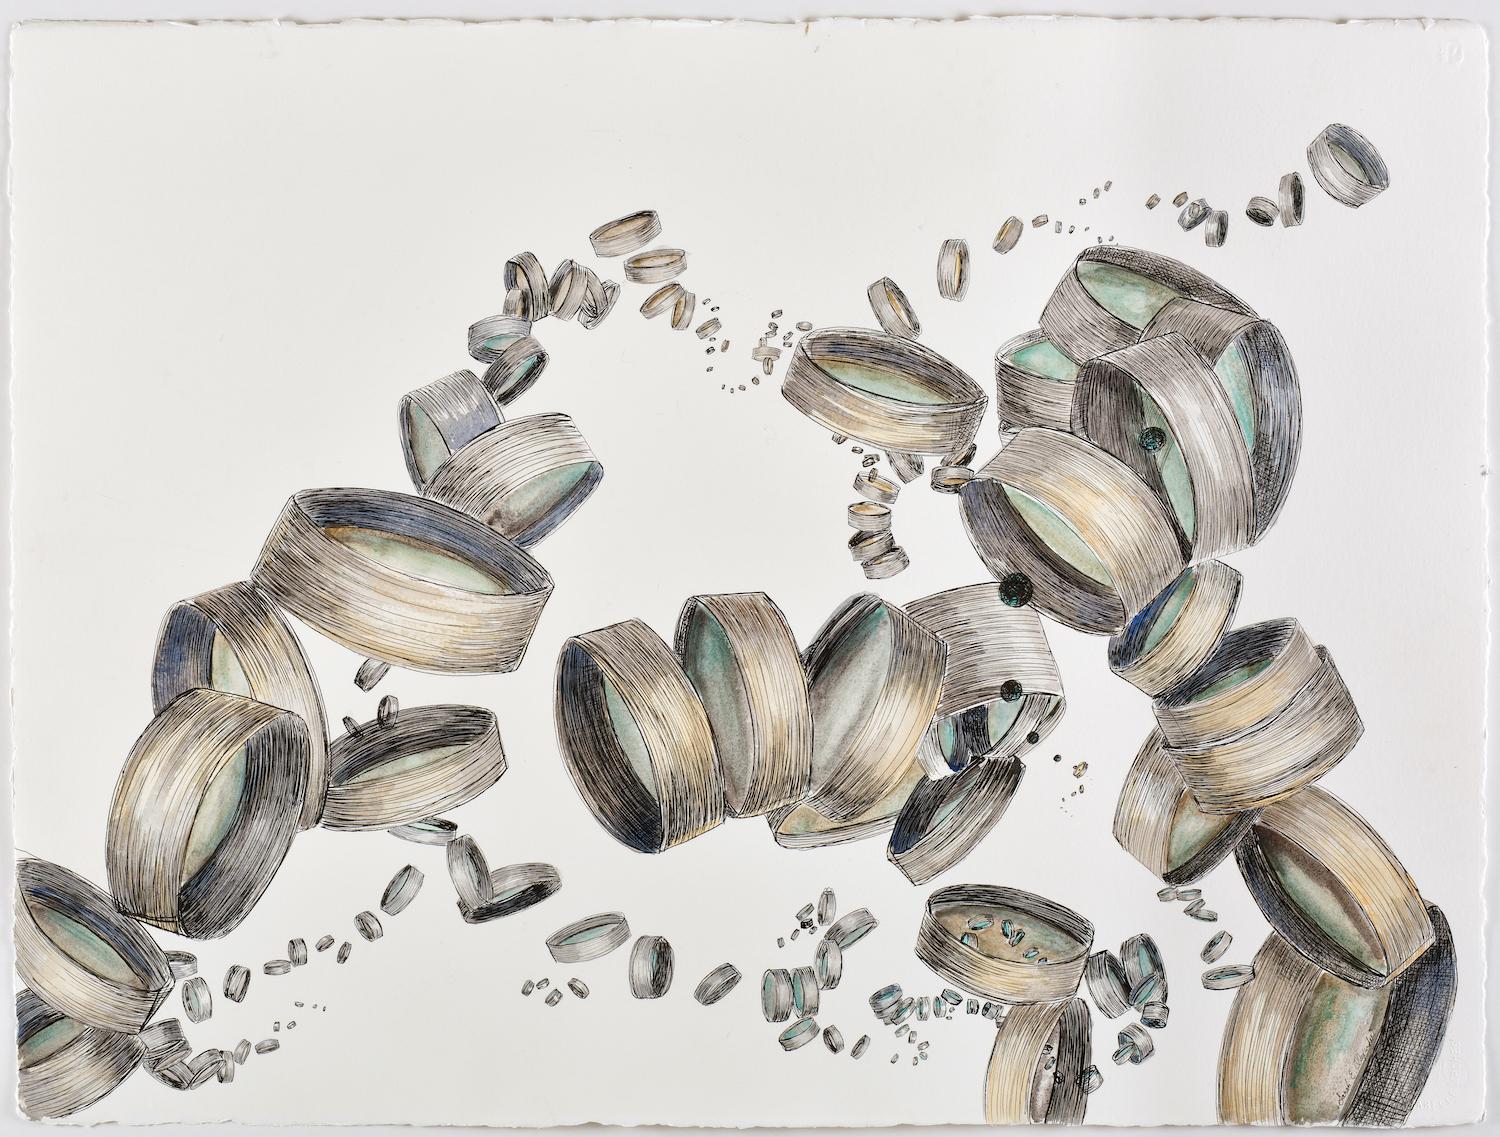 Sarah Alexander Abstract Painting - "Brainstorm", contemporary, green, gray, watercolor, pen and ink, drawing